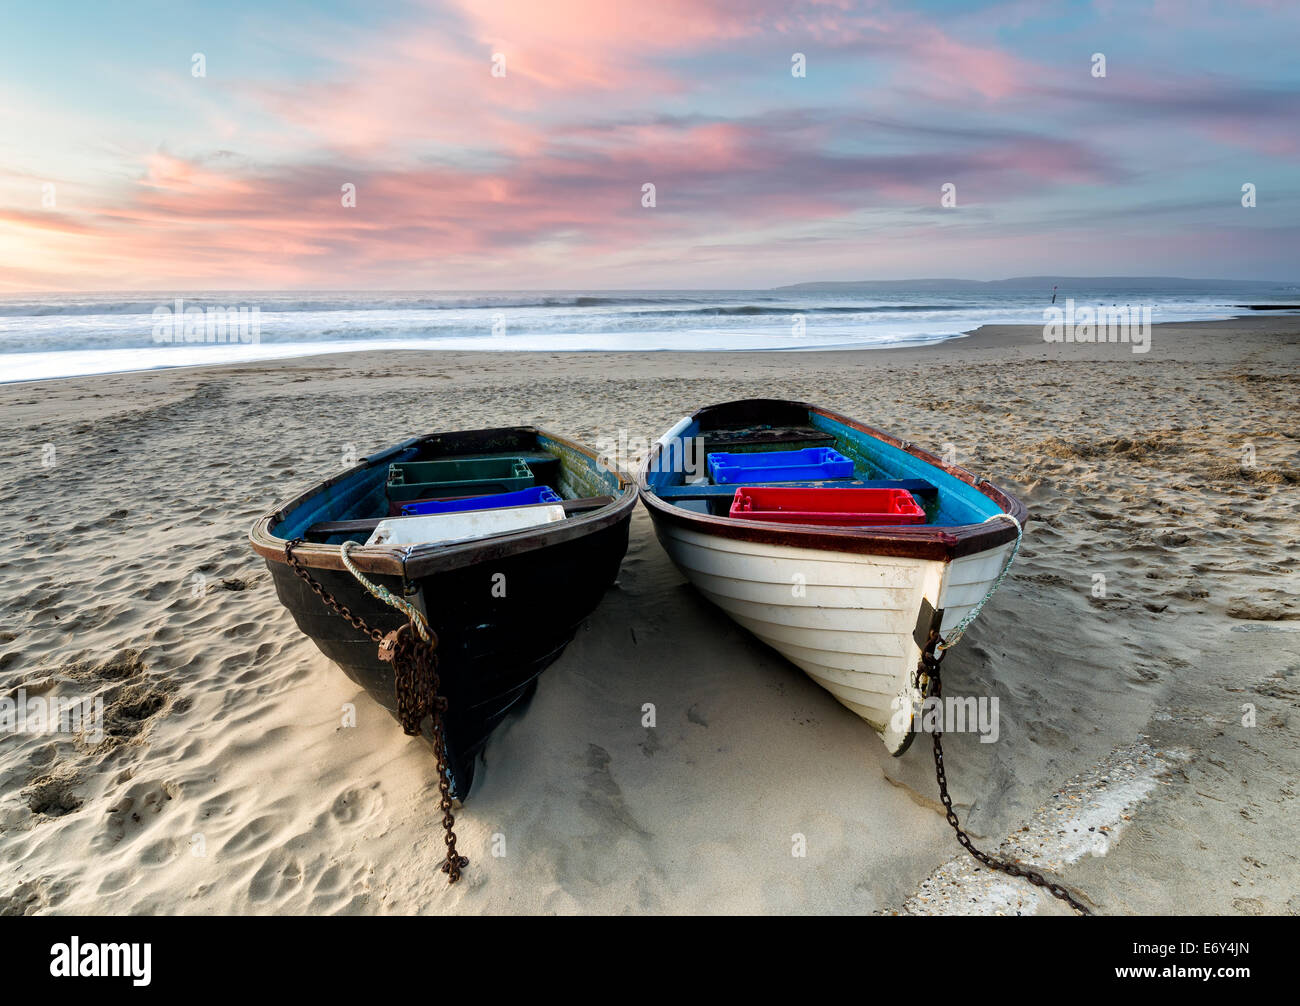 Fishing boats on the beach at Durley Chine, part of Bournemouth beach in Dorset Stock Photo